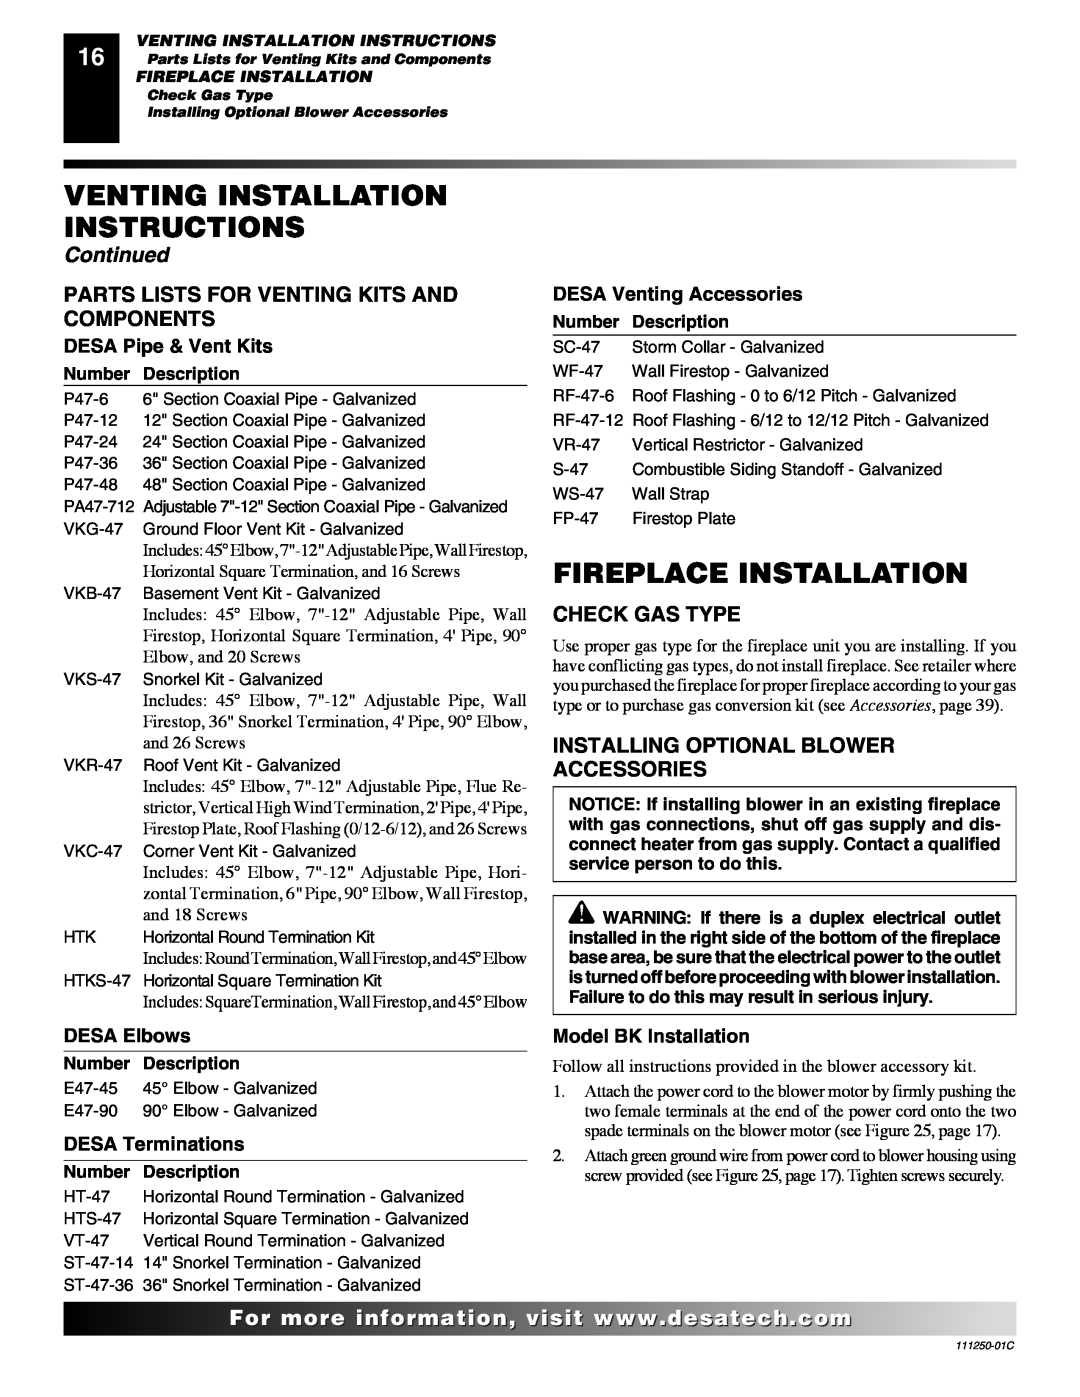 Desa (V)T36NA SERIES Fireplace Installation, Parts Lists For Venting Kits And Components, Check Gas Type, Continued 